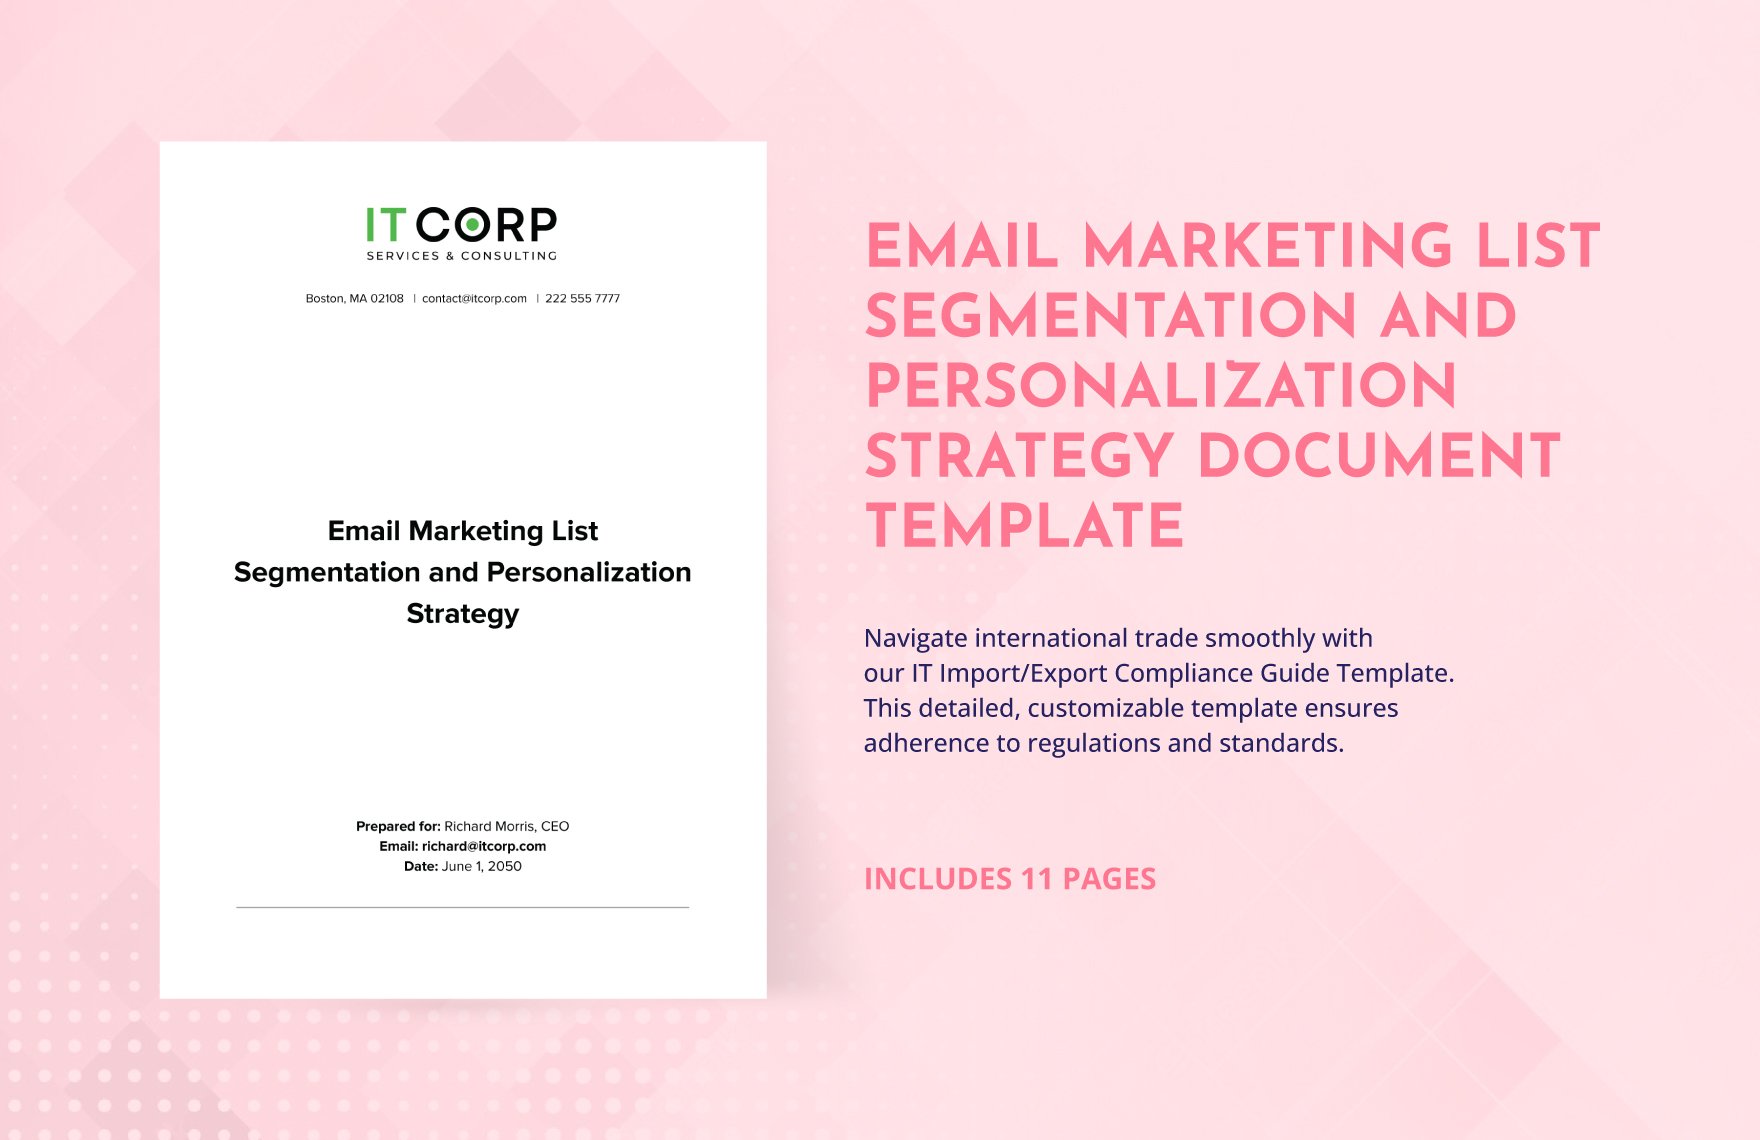 Email Marketing List Segmentation and Personalization Strategy Document Template in Word, Google Docs, PDF